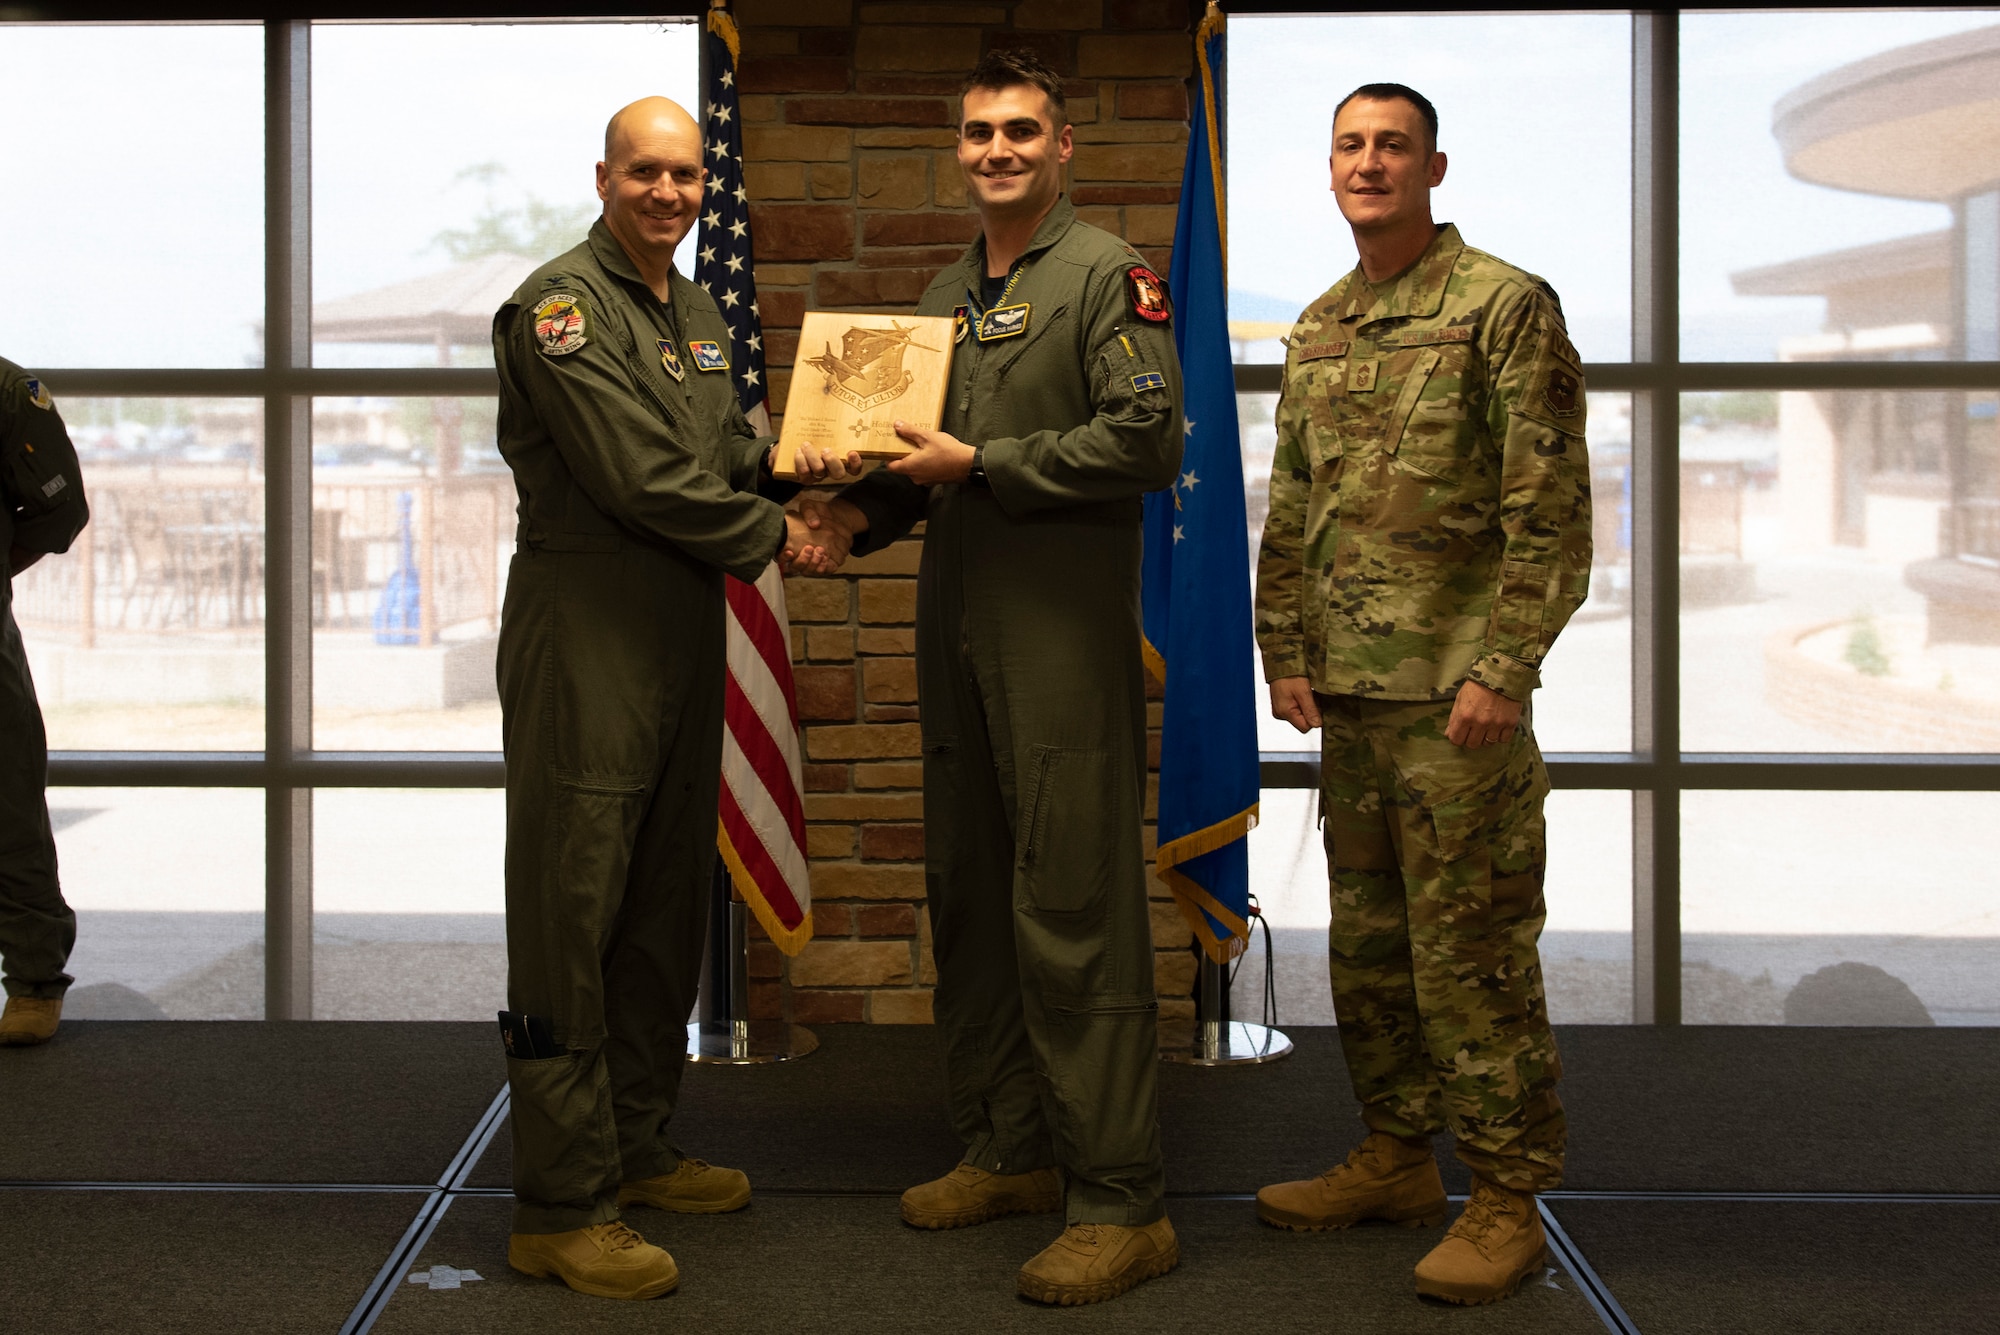 Maj. Michael Karnes, from the 311th Fighter Squadron, accepts the Company Grade Officer of the Quarter Award during the 49th Wing’s 1st quarter awards ceremony, June 10, 2022, on Holloman Air Force Base, New Mexico.